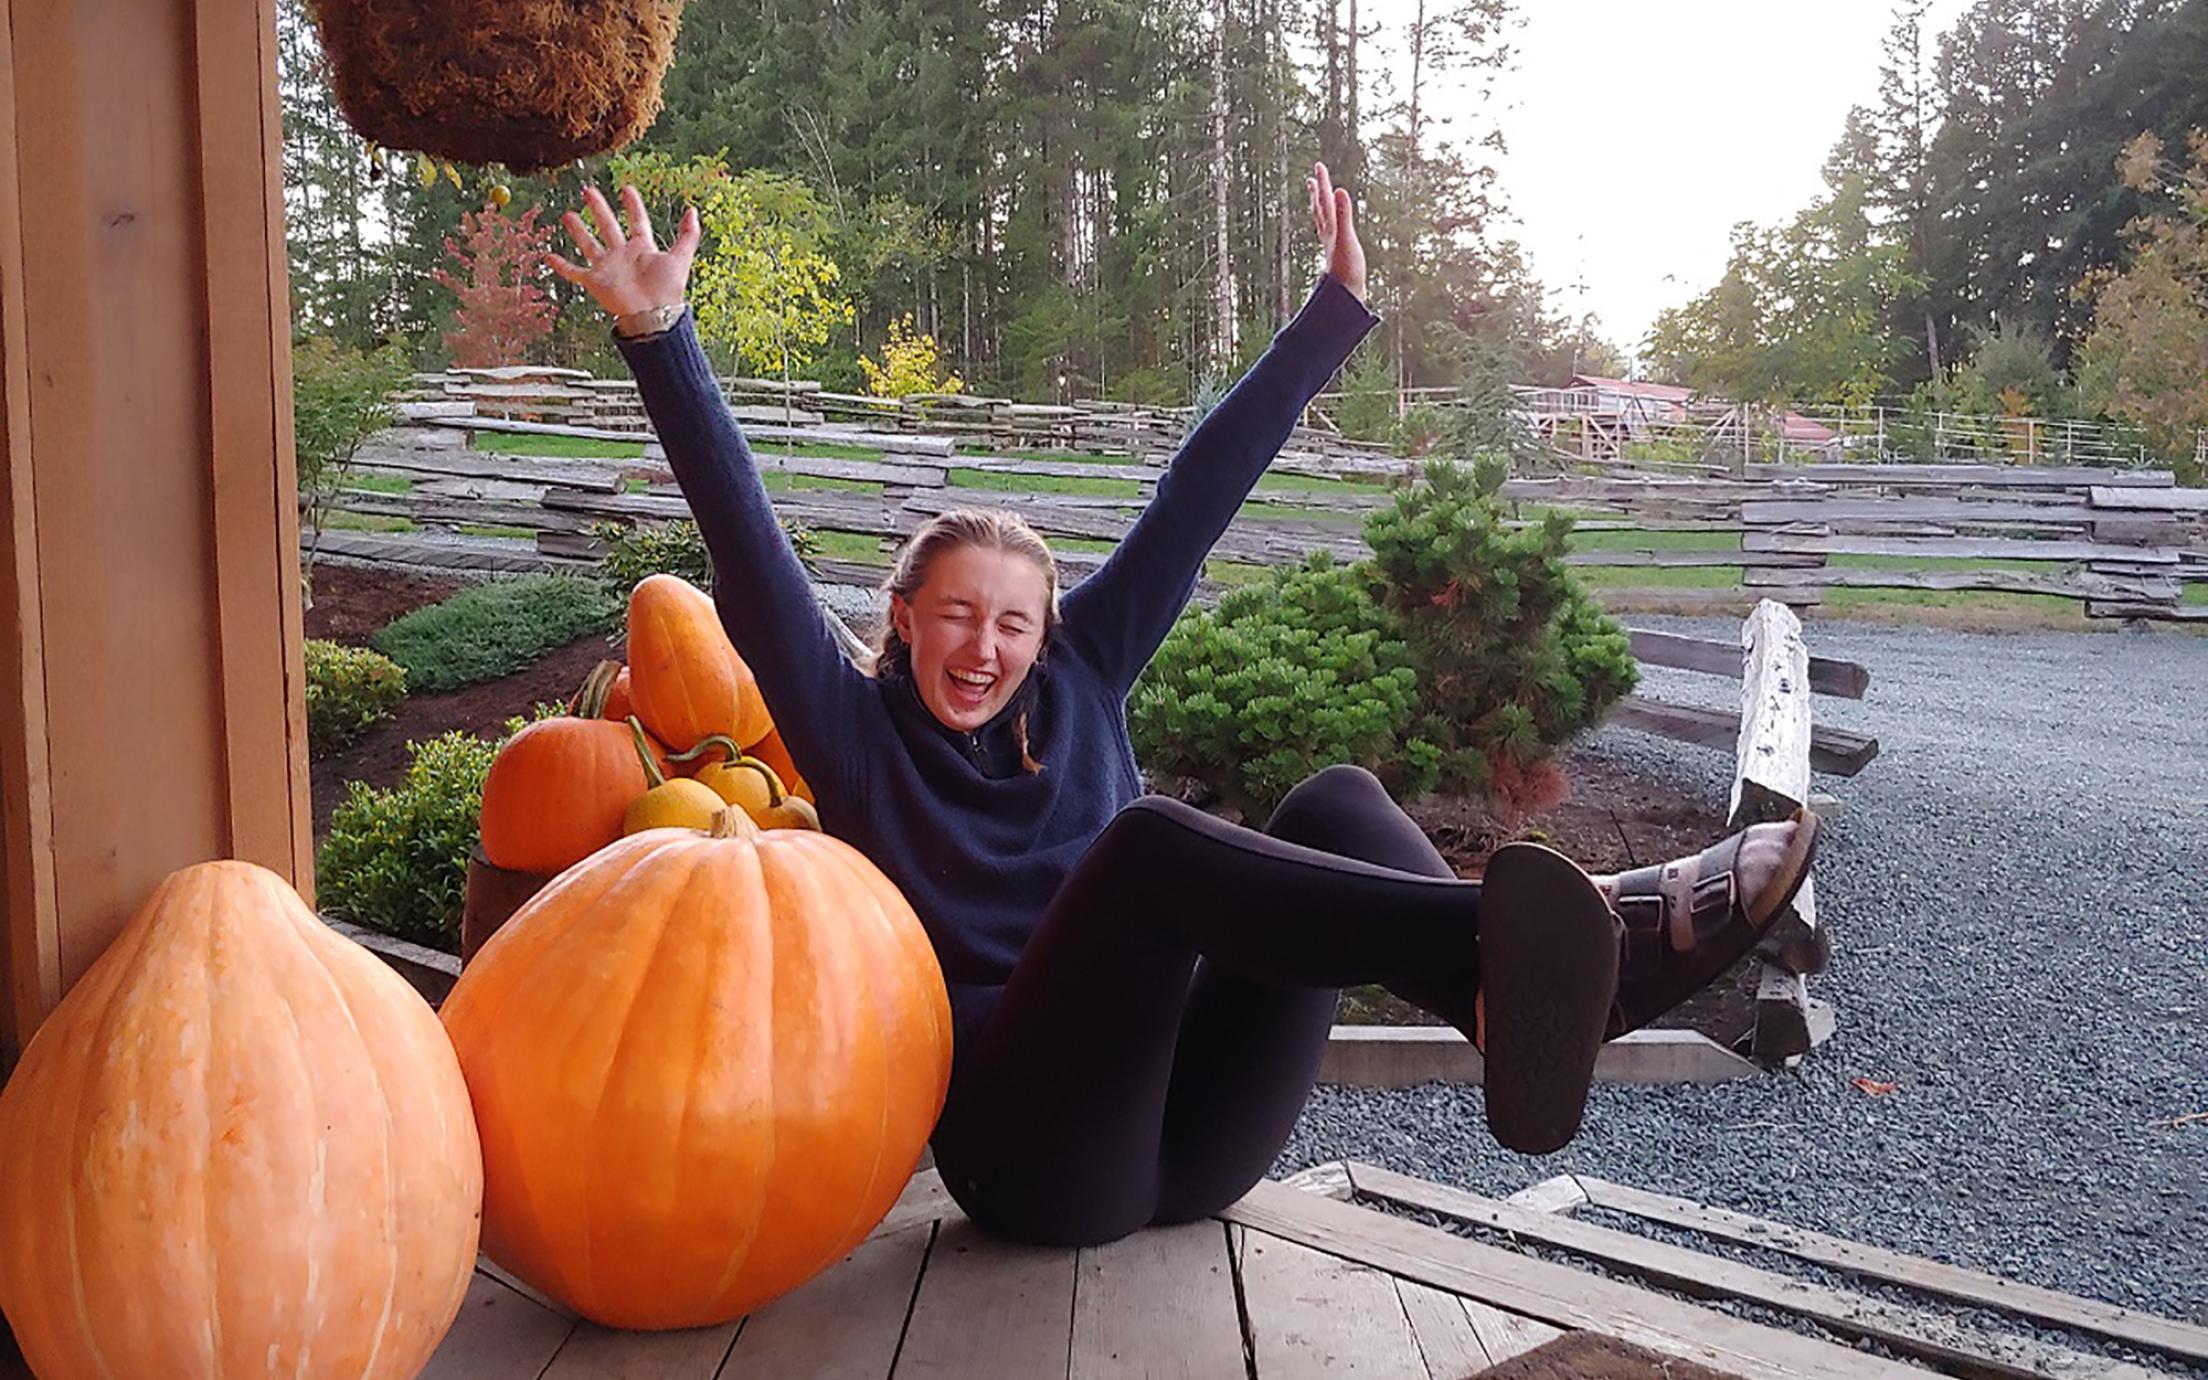 Girl poses with arms spread next to pumpkins